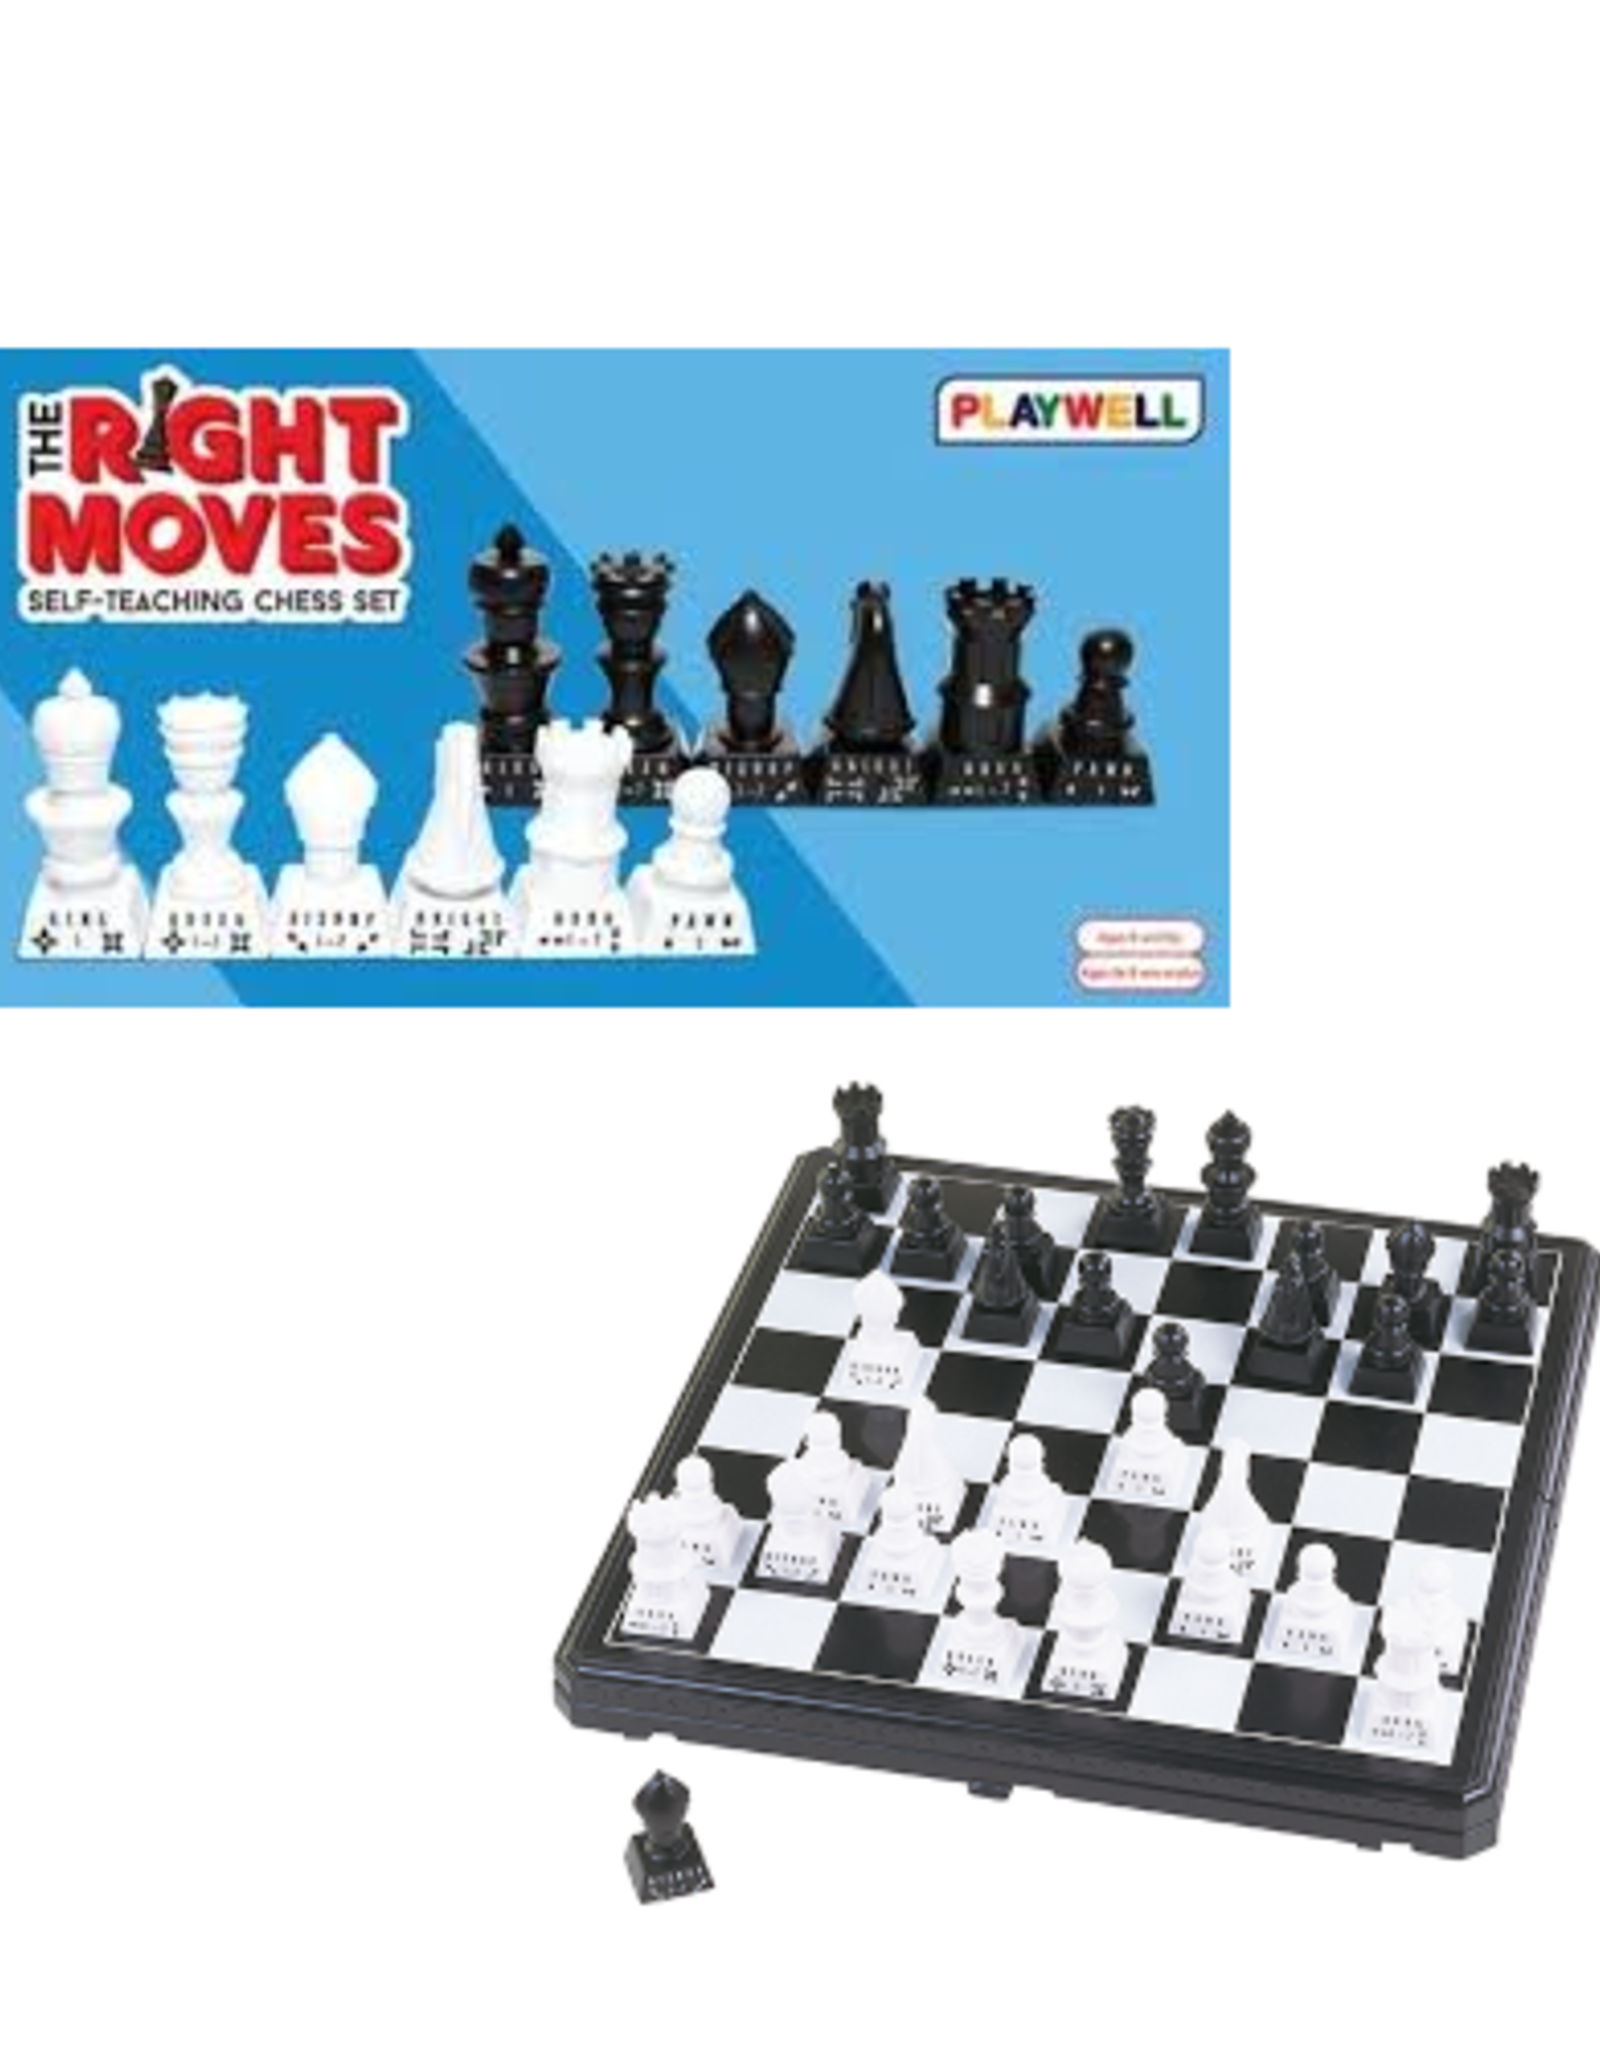 Playwell Playwell - Right Moves Self Teaching Chess Set